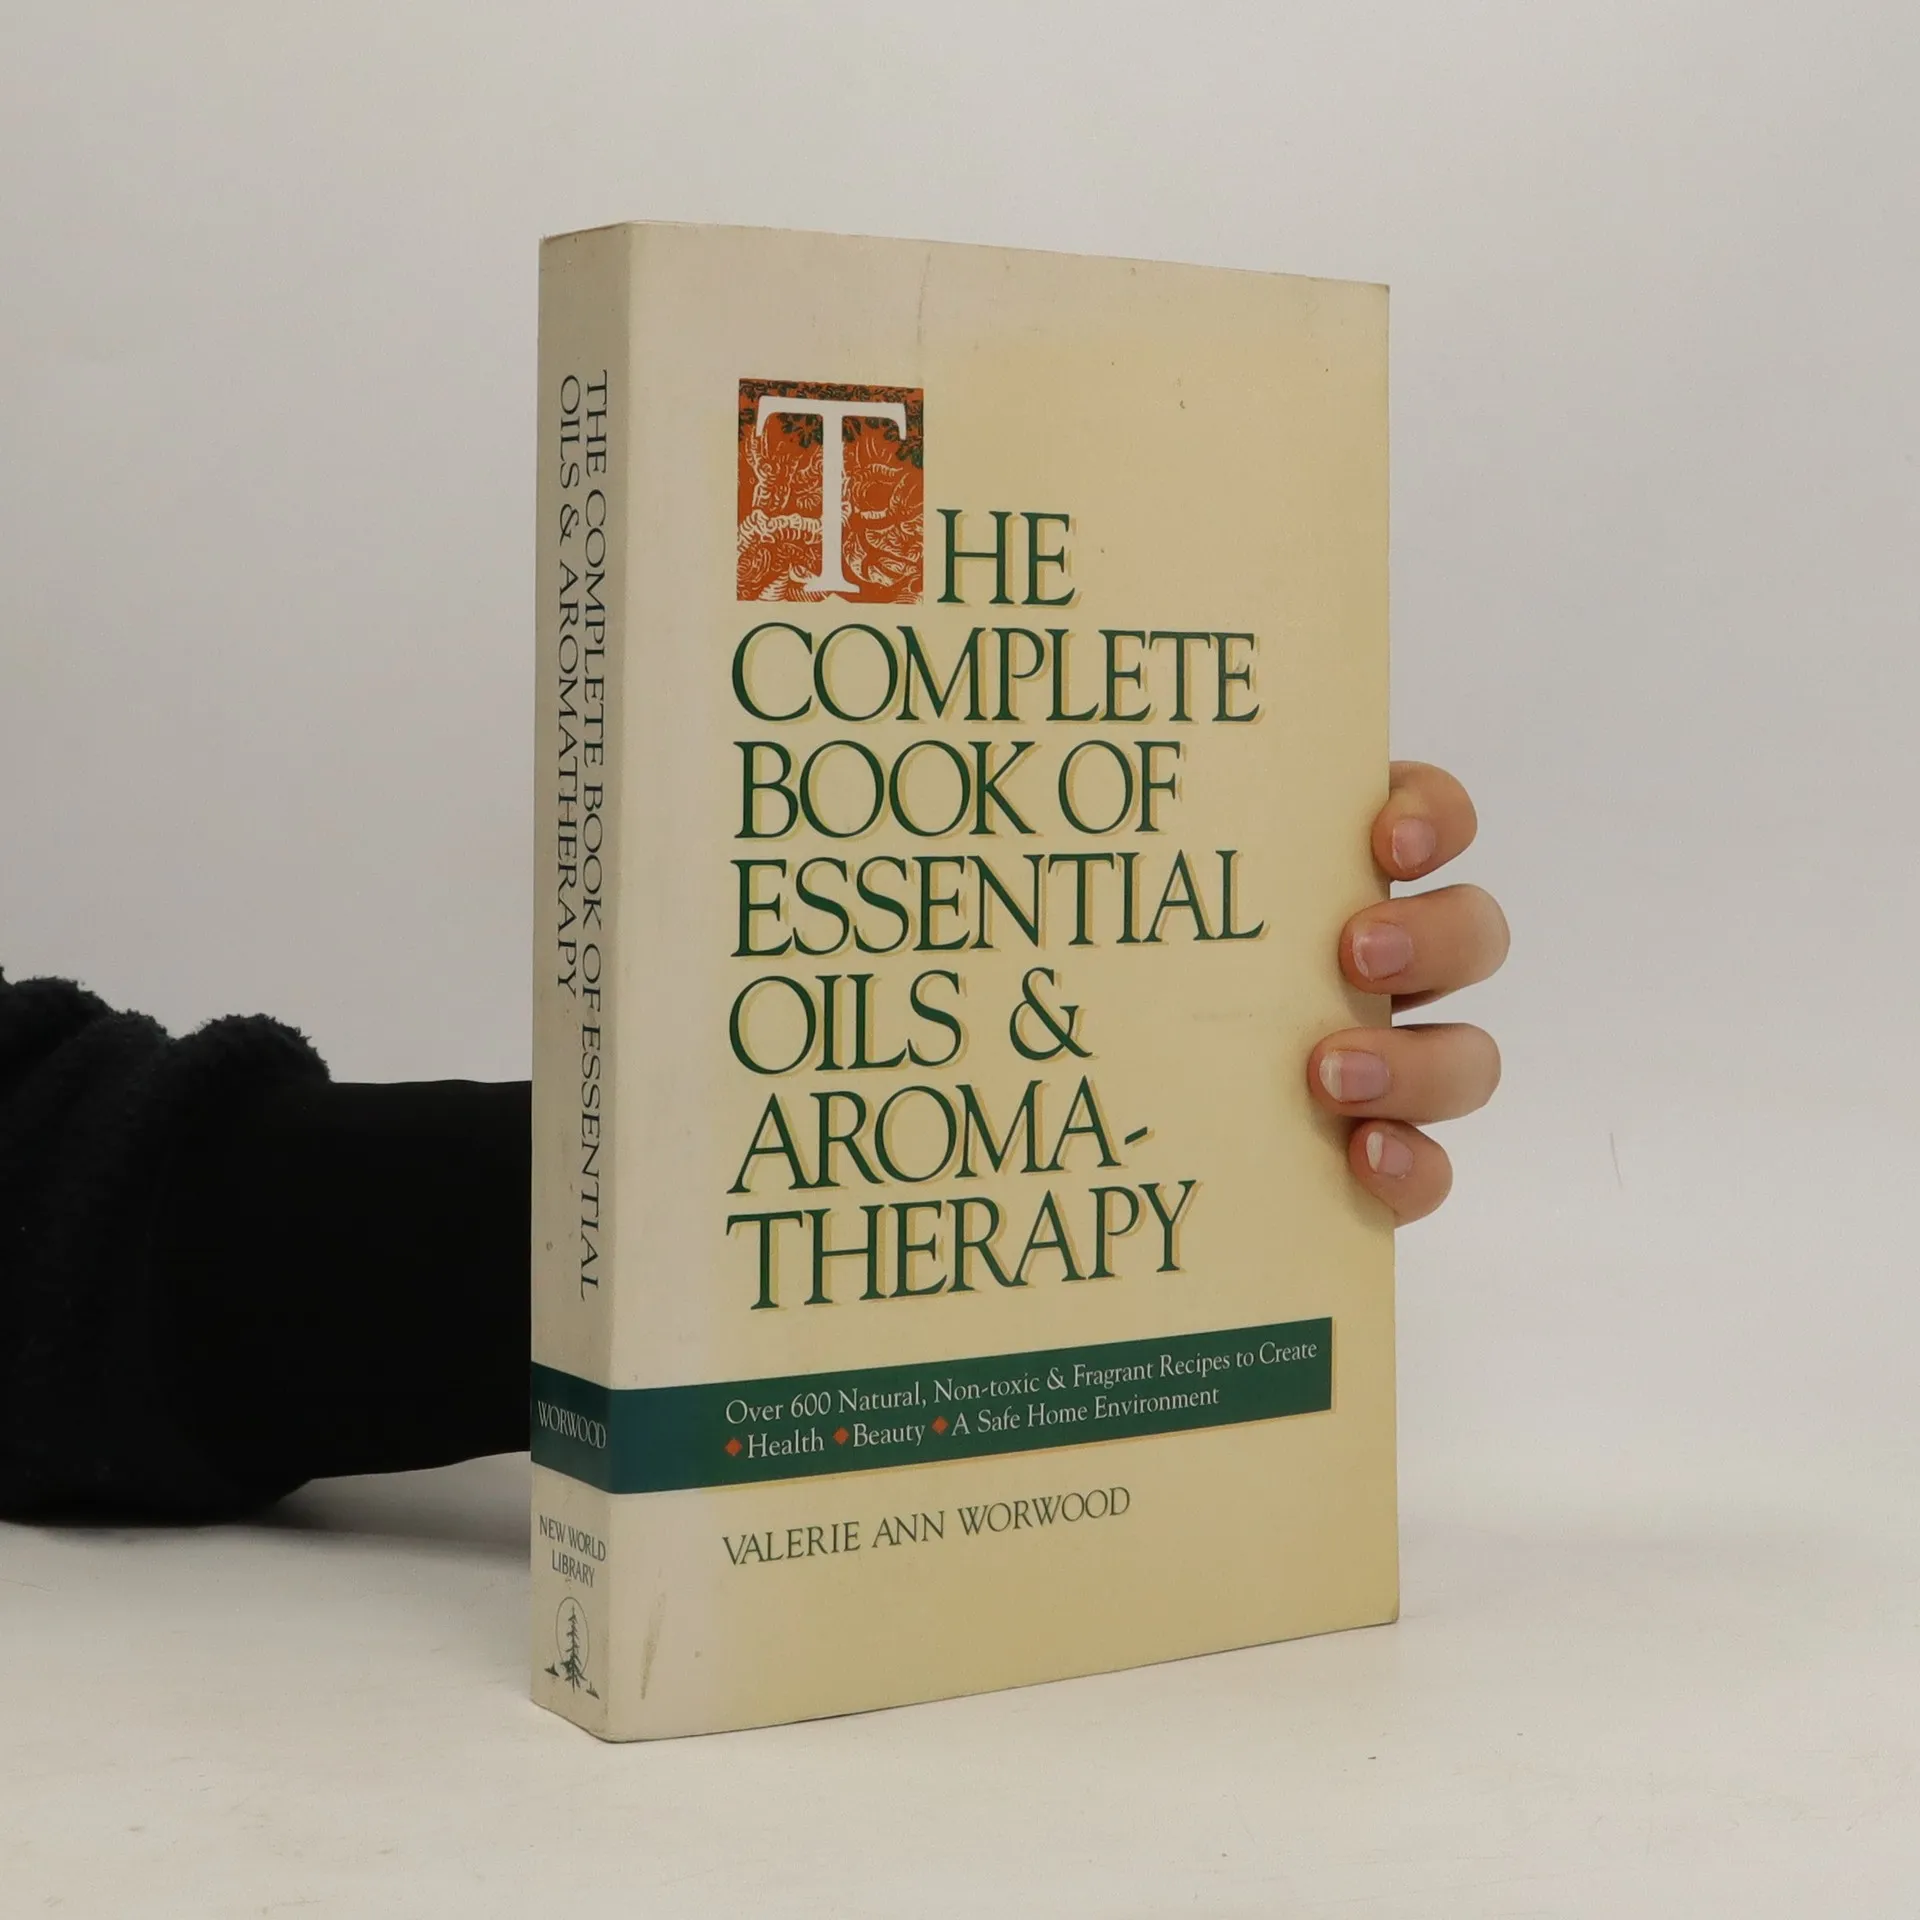 The Complete Book of Essential Oils and book by Valerie Ann Worwood